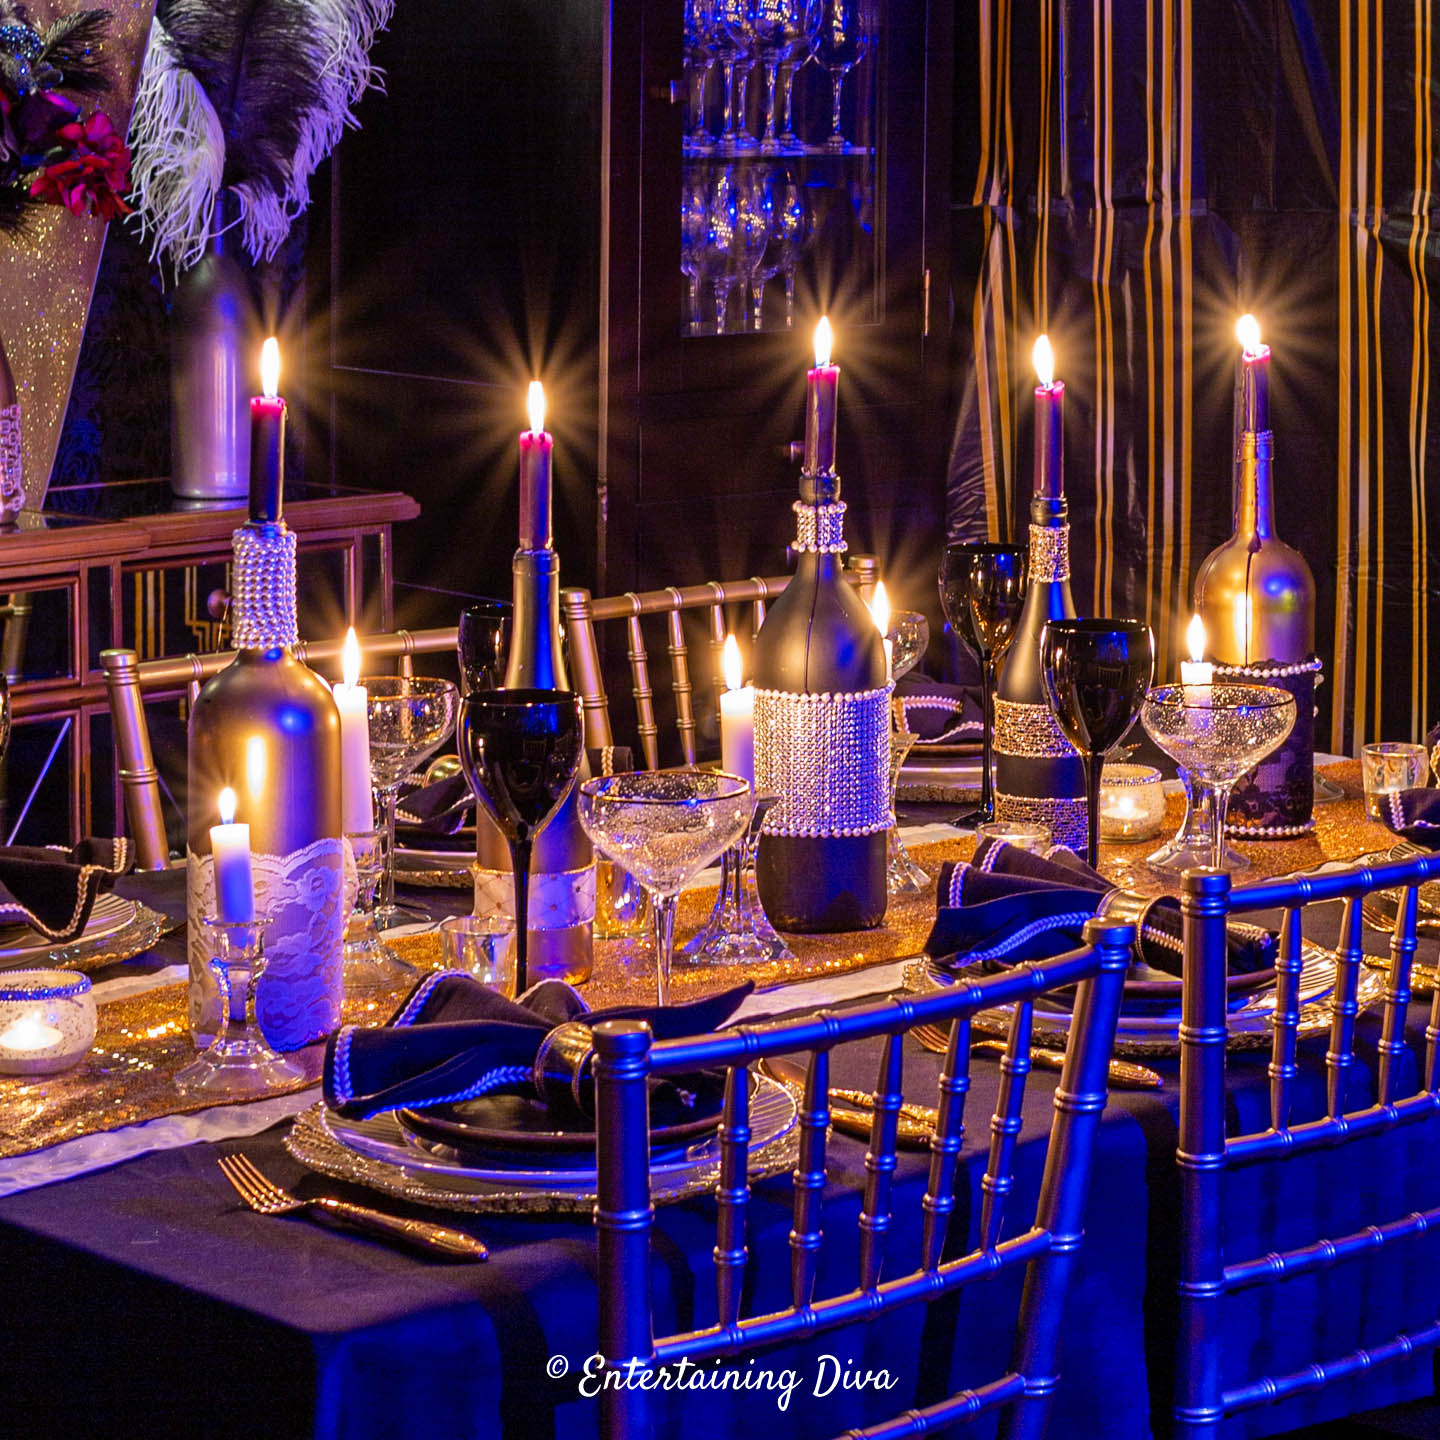 Wine bottle candle holders on a Great Gatsby part table